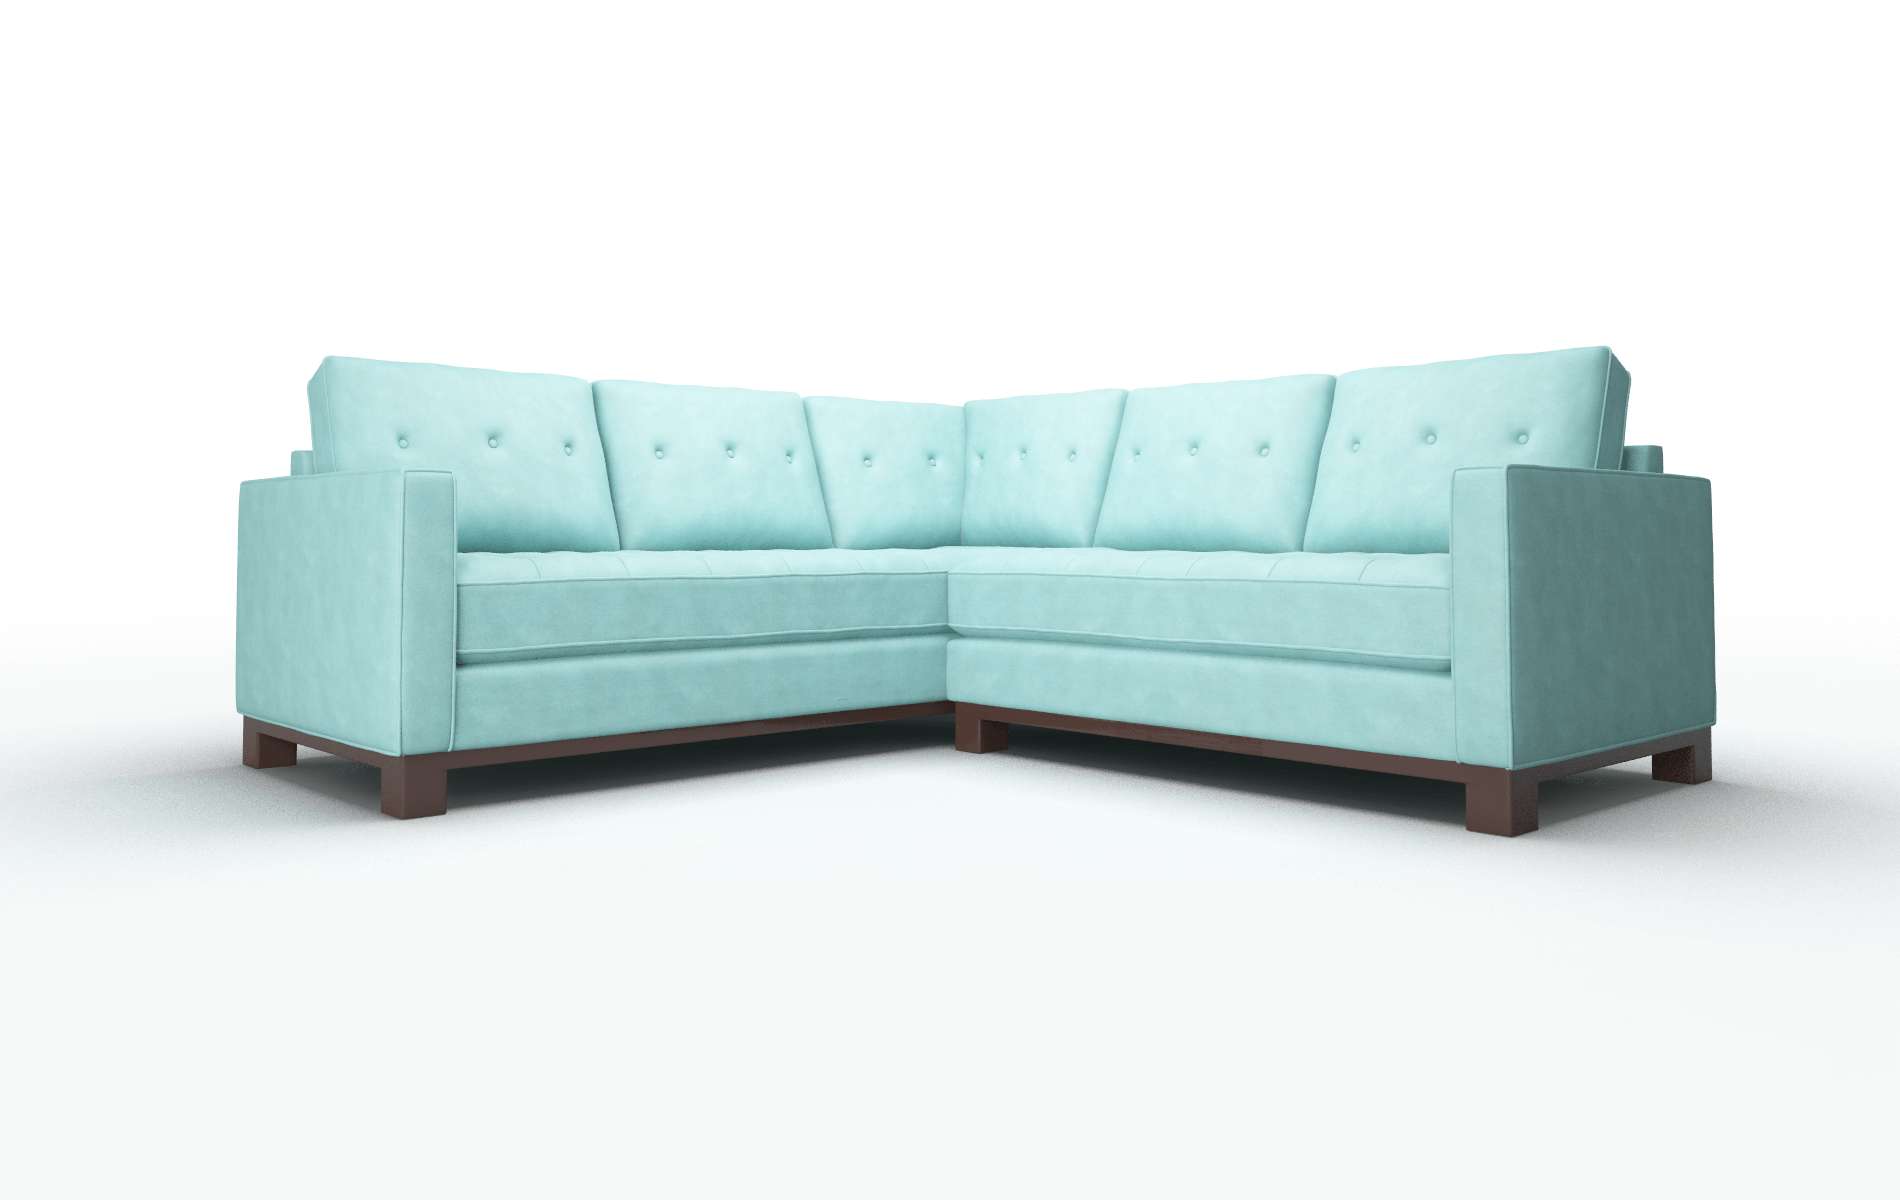 Syros Curious Turquoise Sectional espresso legs